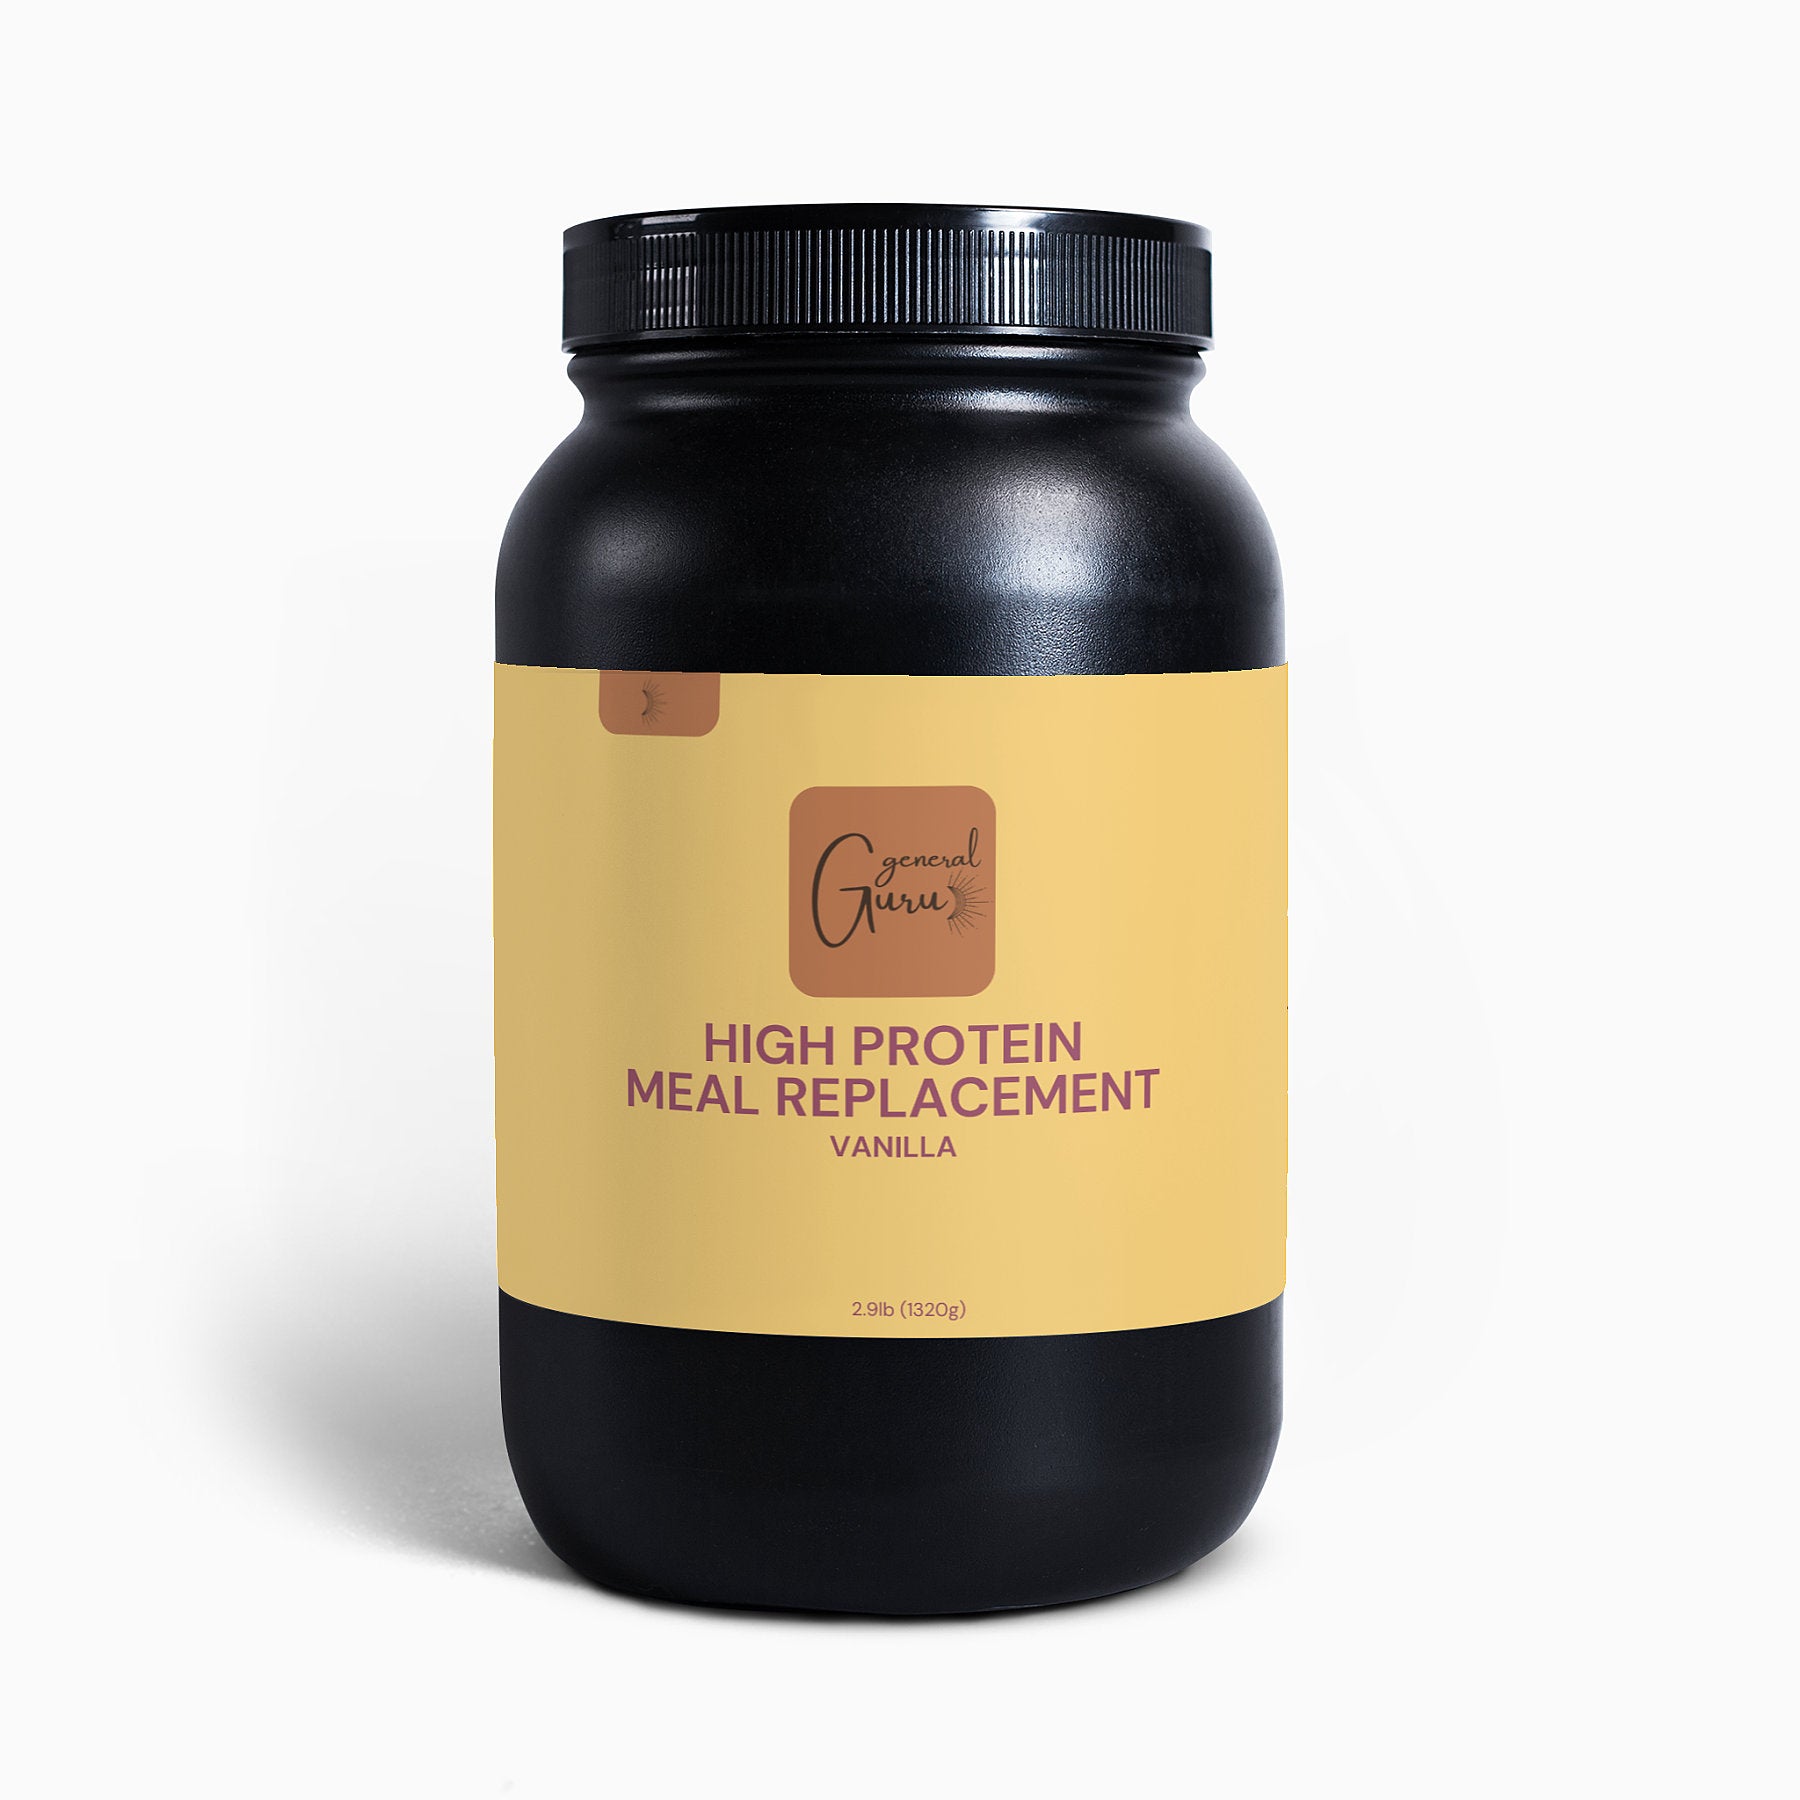 Vanilla Bliss in Every Sip - Elevate your meal with our High Protein Meal Replacement in Vanilla flavor. A delightful and protein-packed addition to your daily routine.